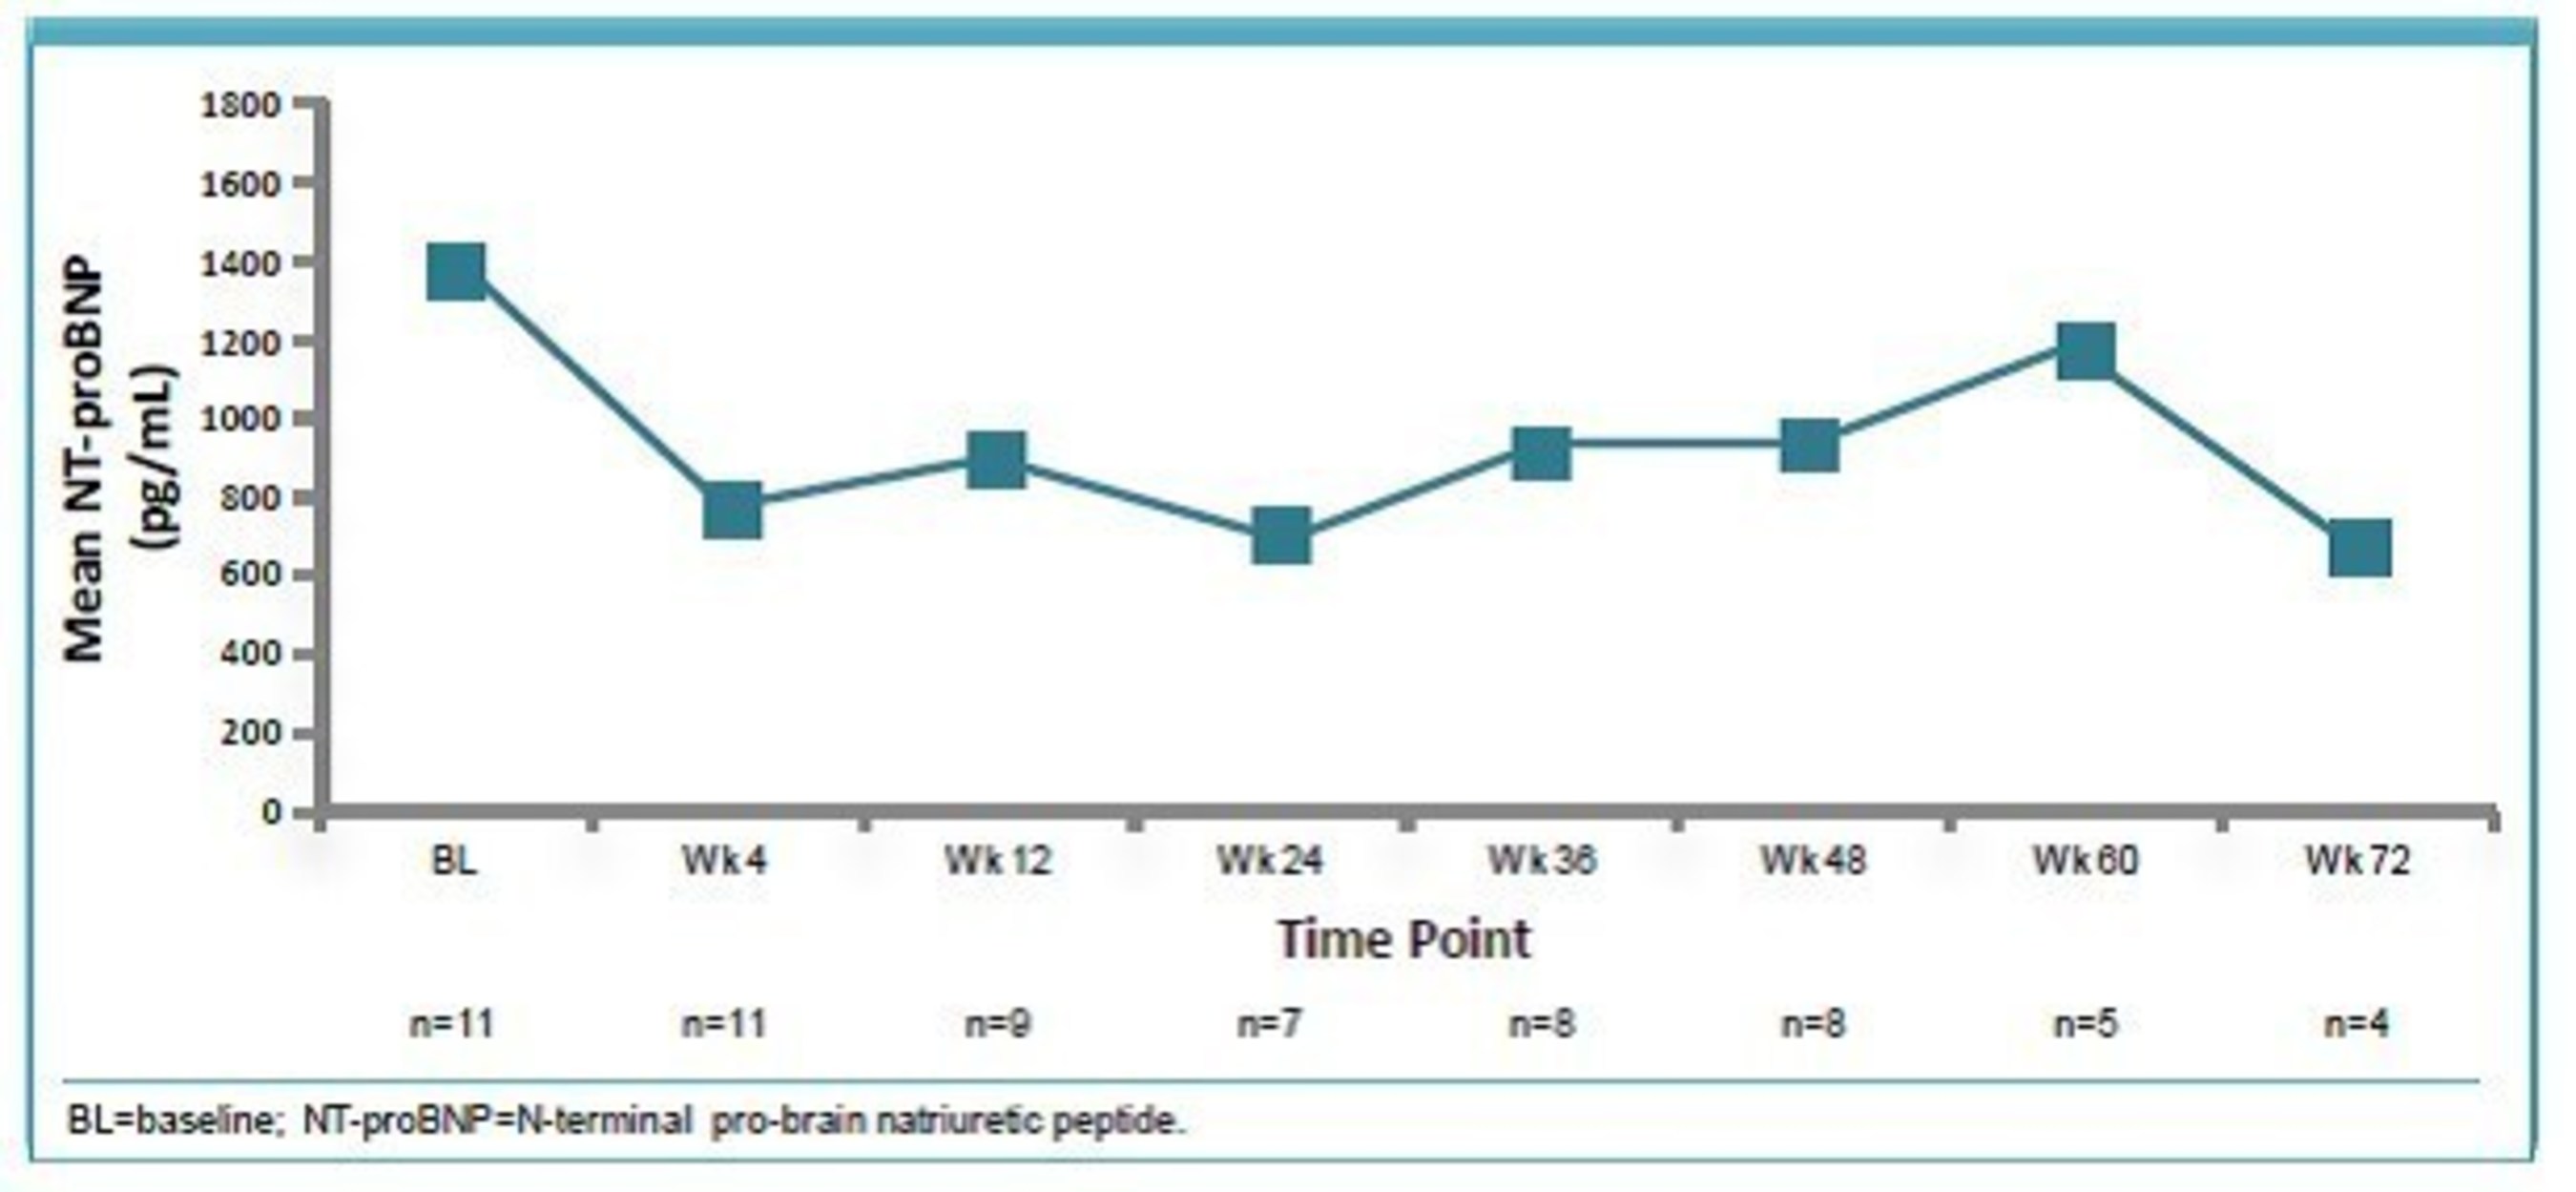 The chart shows that the improvements in mean NT-proBNP levels were sustained over time with ARRY-797 treatment.